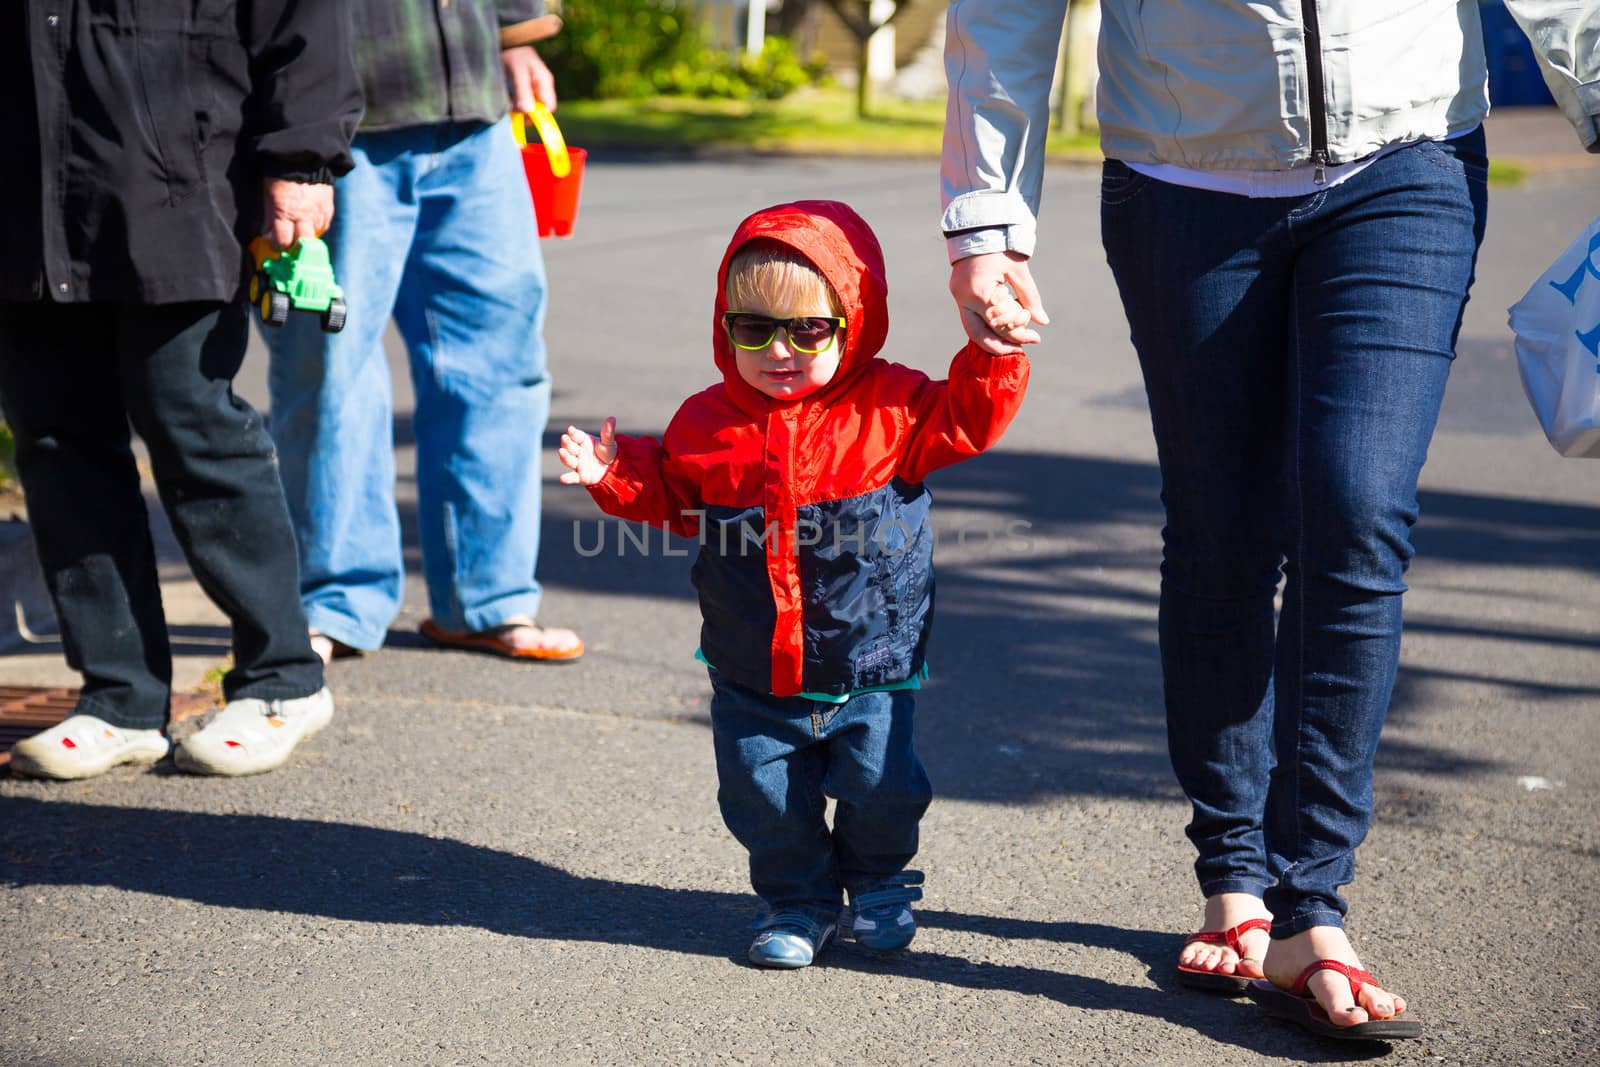 A young boy wears his sunglasses while walking back from the beach with his mom on a cool looking out of focus street.